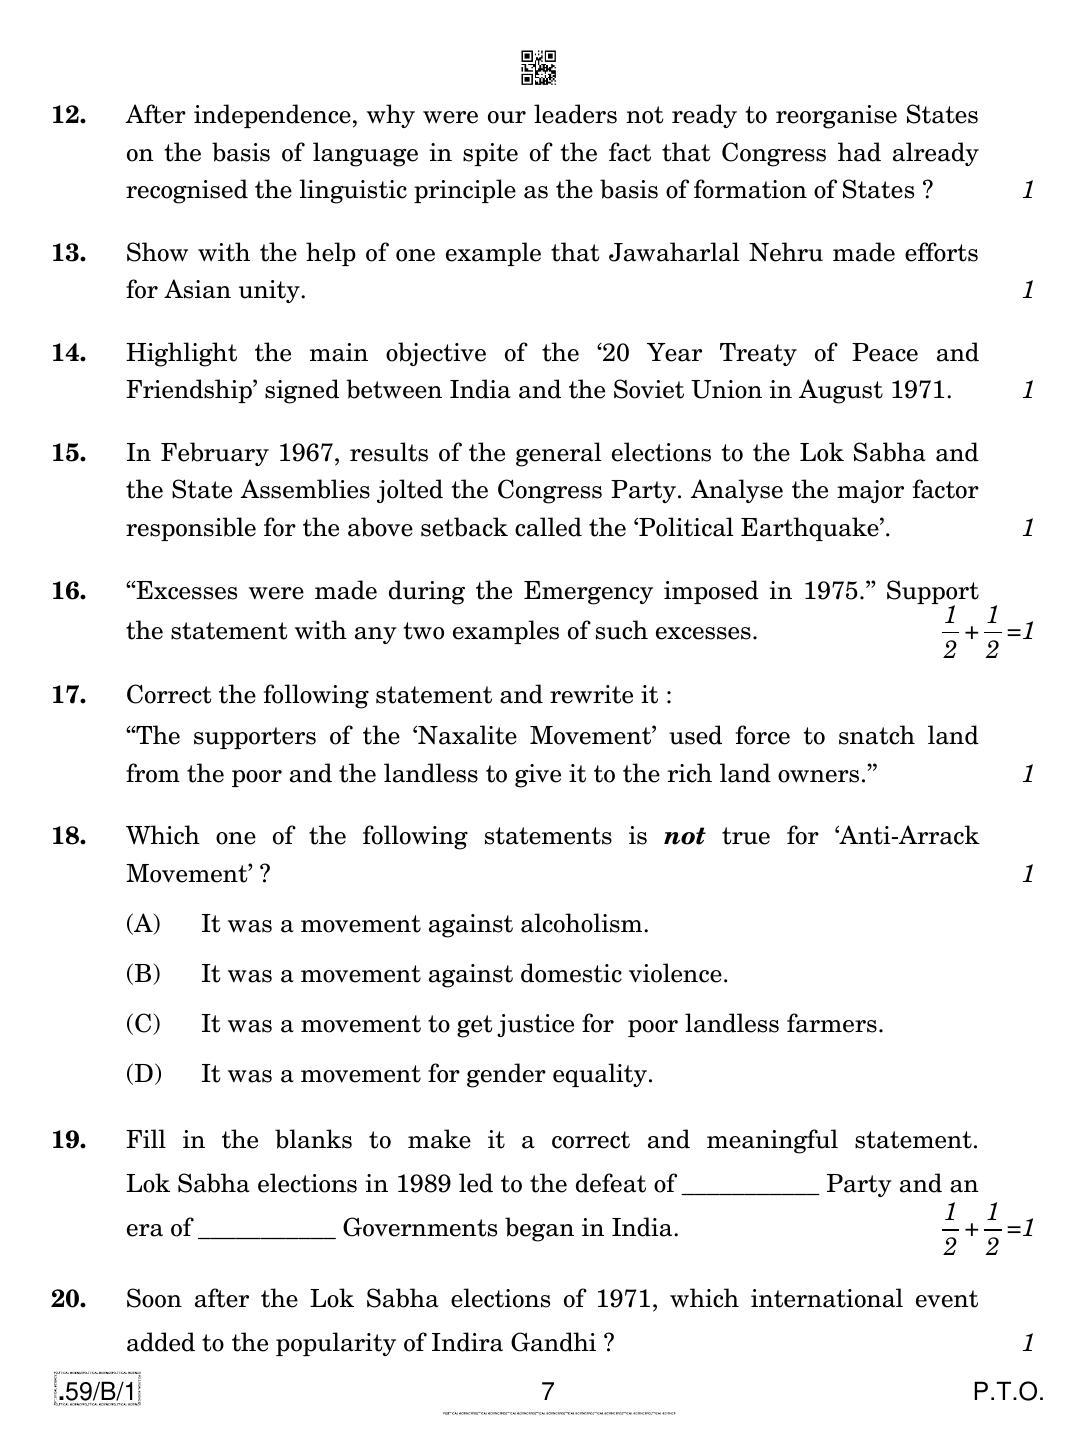 CBSE Class 12 59-C-1 - Political Science 2020 Compartment Question Paper - Page 7